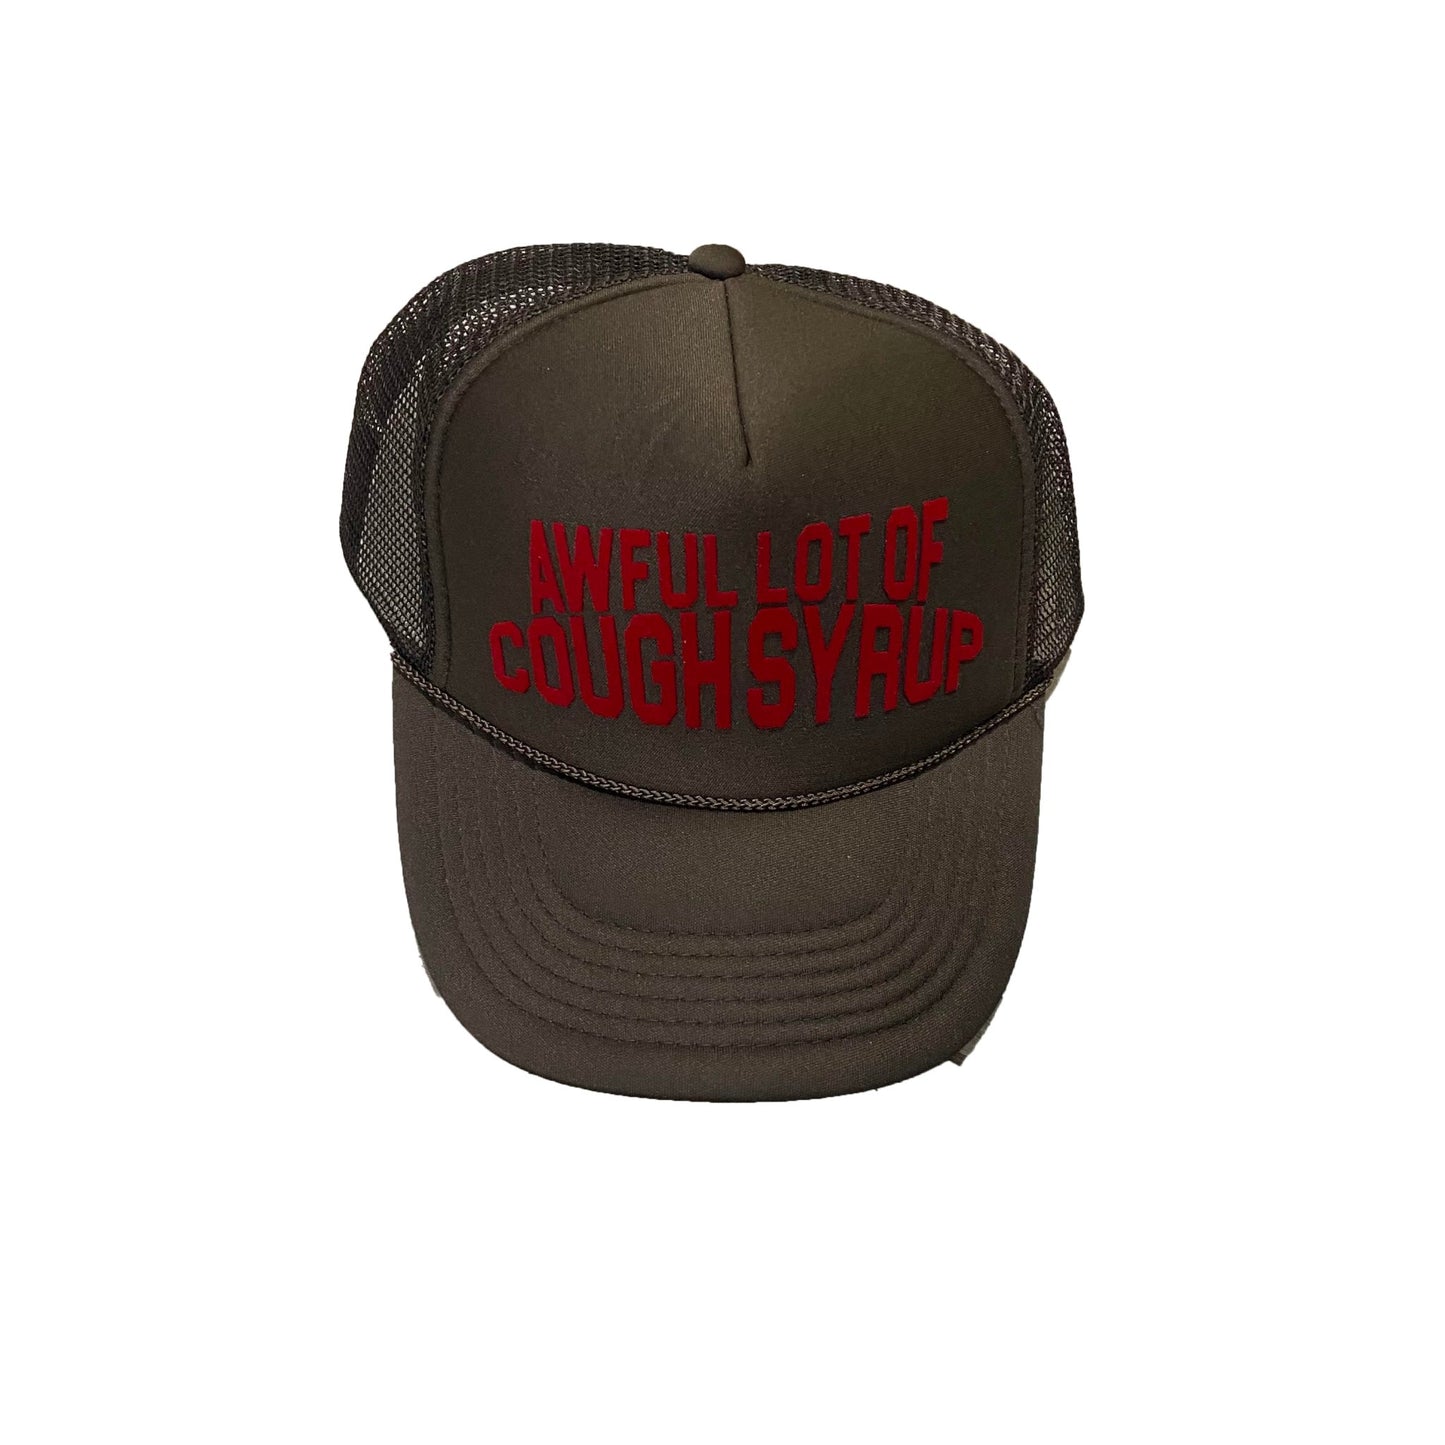 That's A Awful Lot Of Cough Syrup Trucker Hat Brown Red - Supra Sneakers